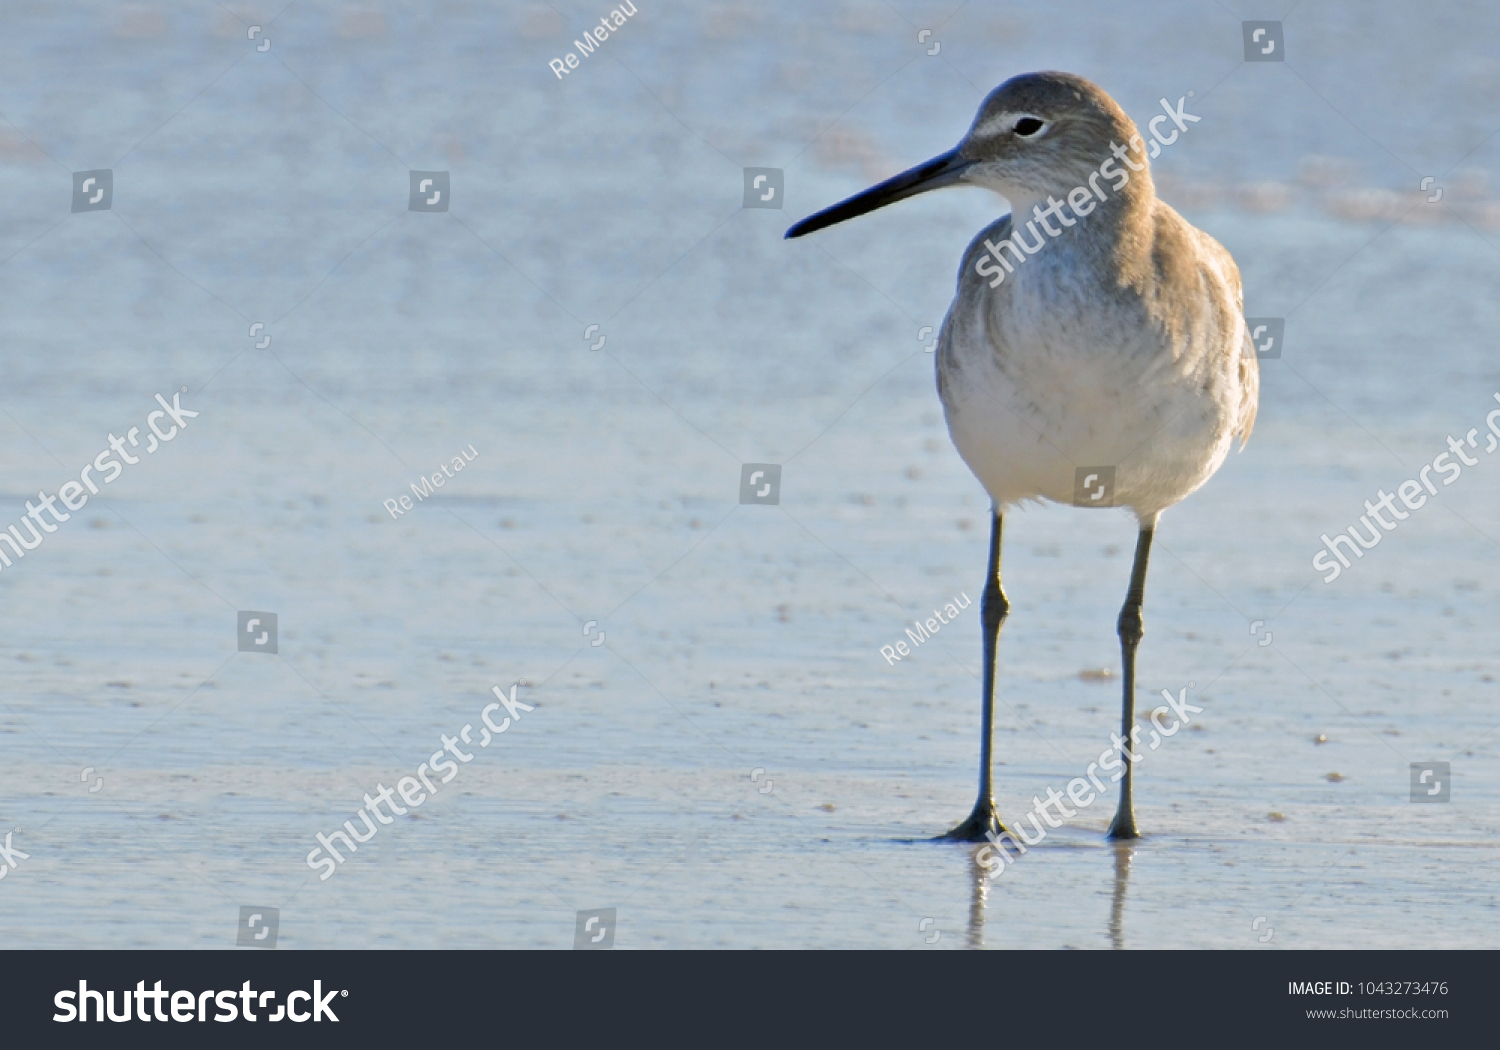 Full frontal close up of American short-billed dowitcher sandpiper to right, sunlit from side facing left, standing on the blue green surf of Florida's Gulf Coast with room for copy to left. #1043273476